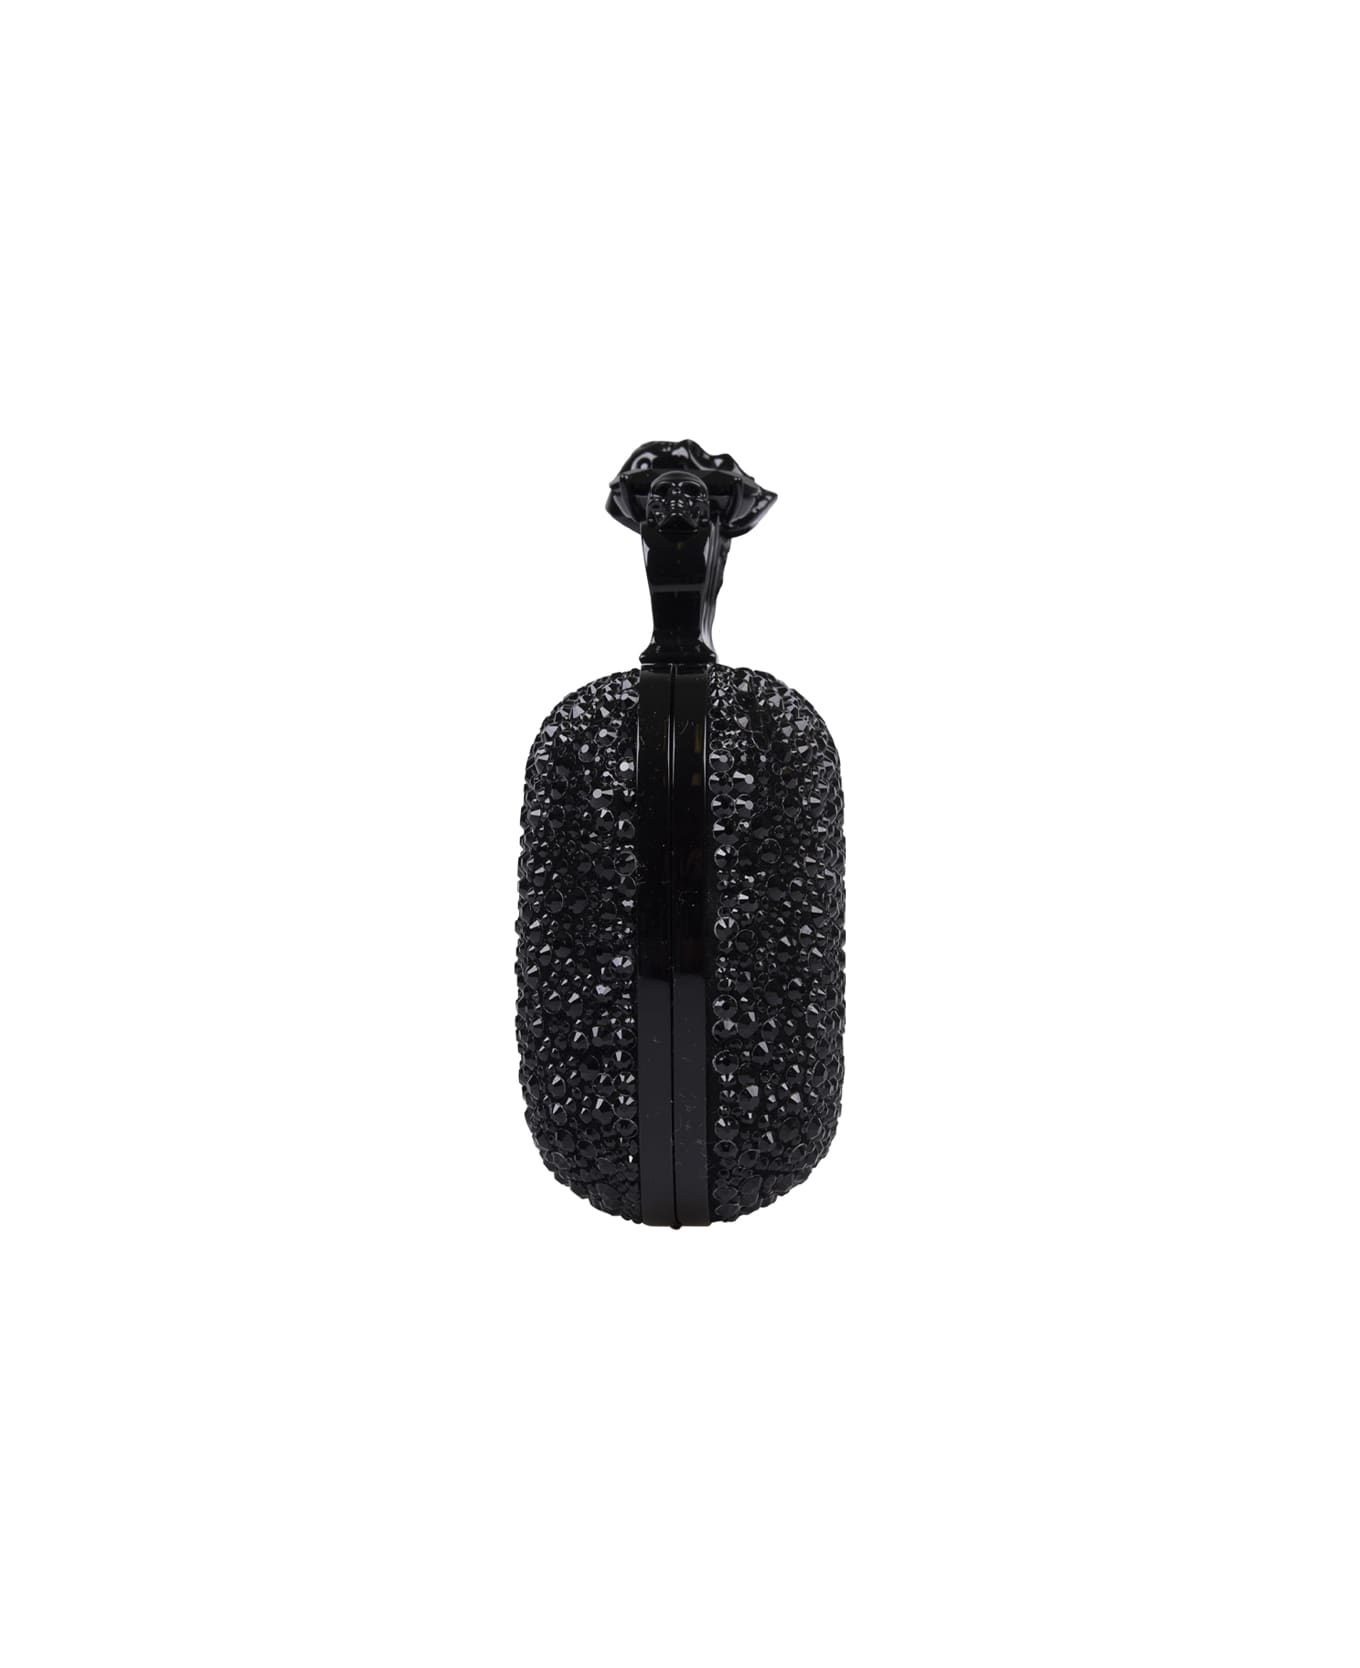 Alexander McQueen Black Skull Four Ring Clutch Bag With Chain - Nero クラッチバッグ